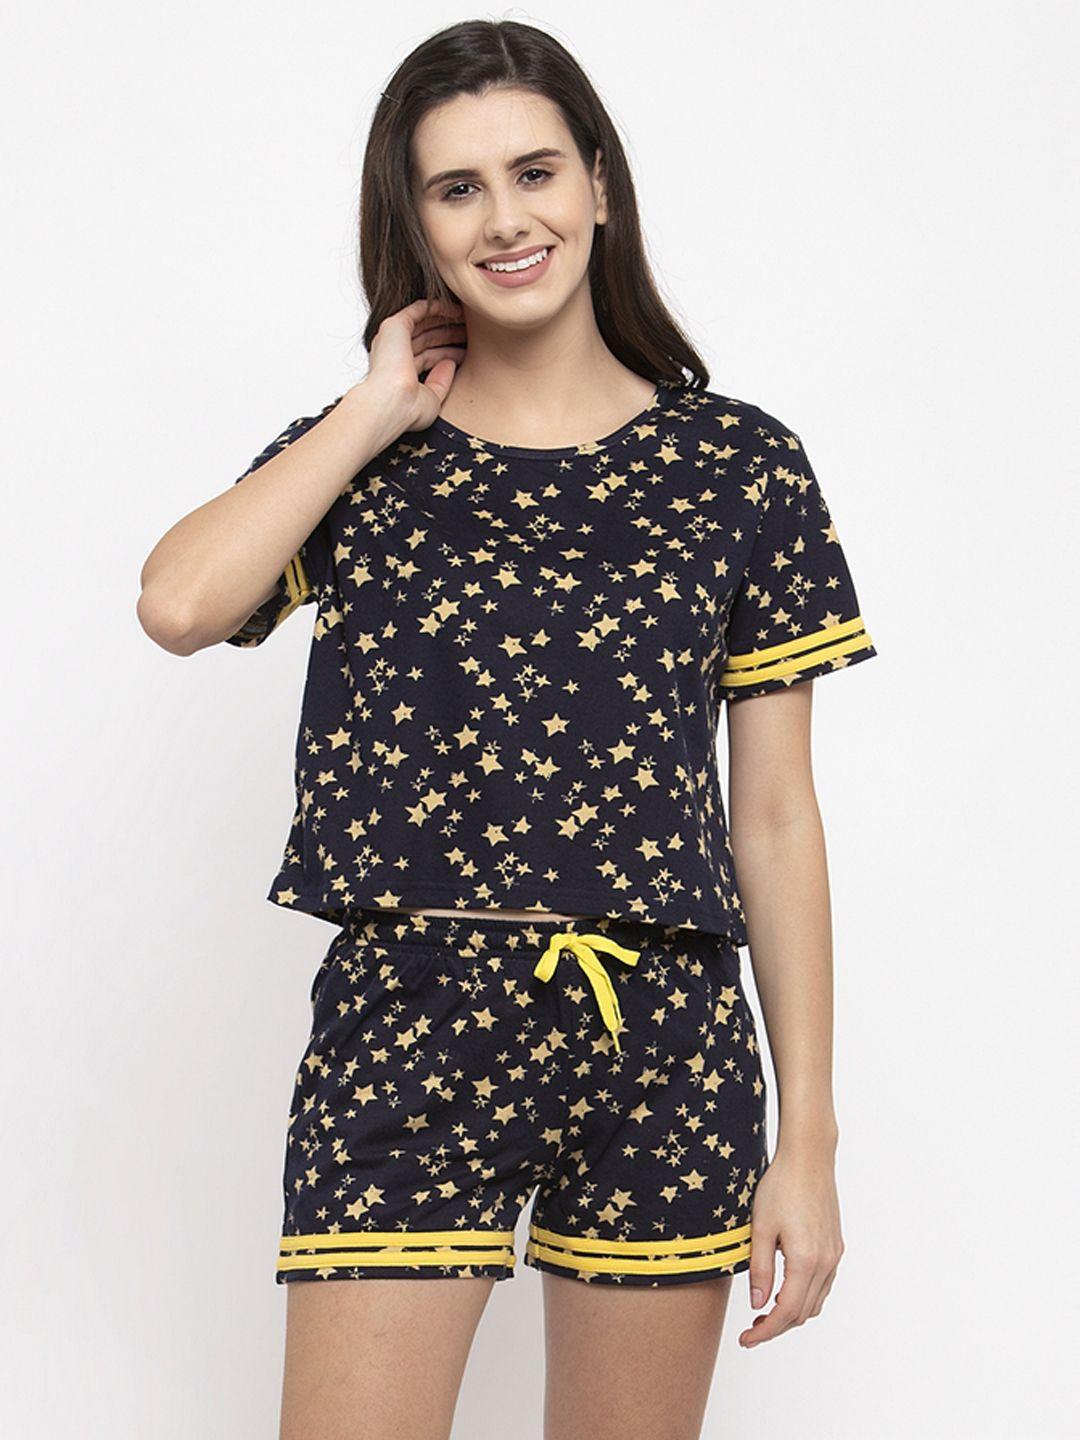 claura-women-navy-blue-&-yellow-printed-night-suit-cot-163